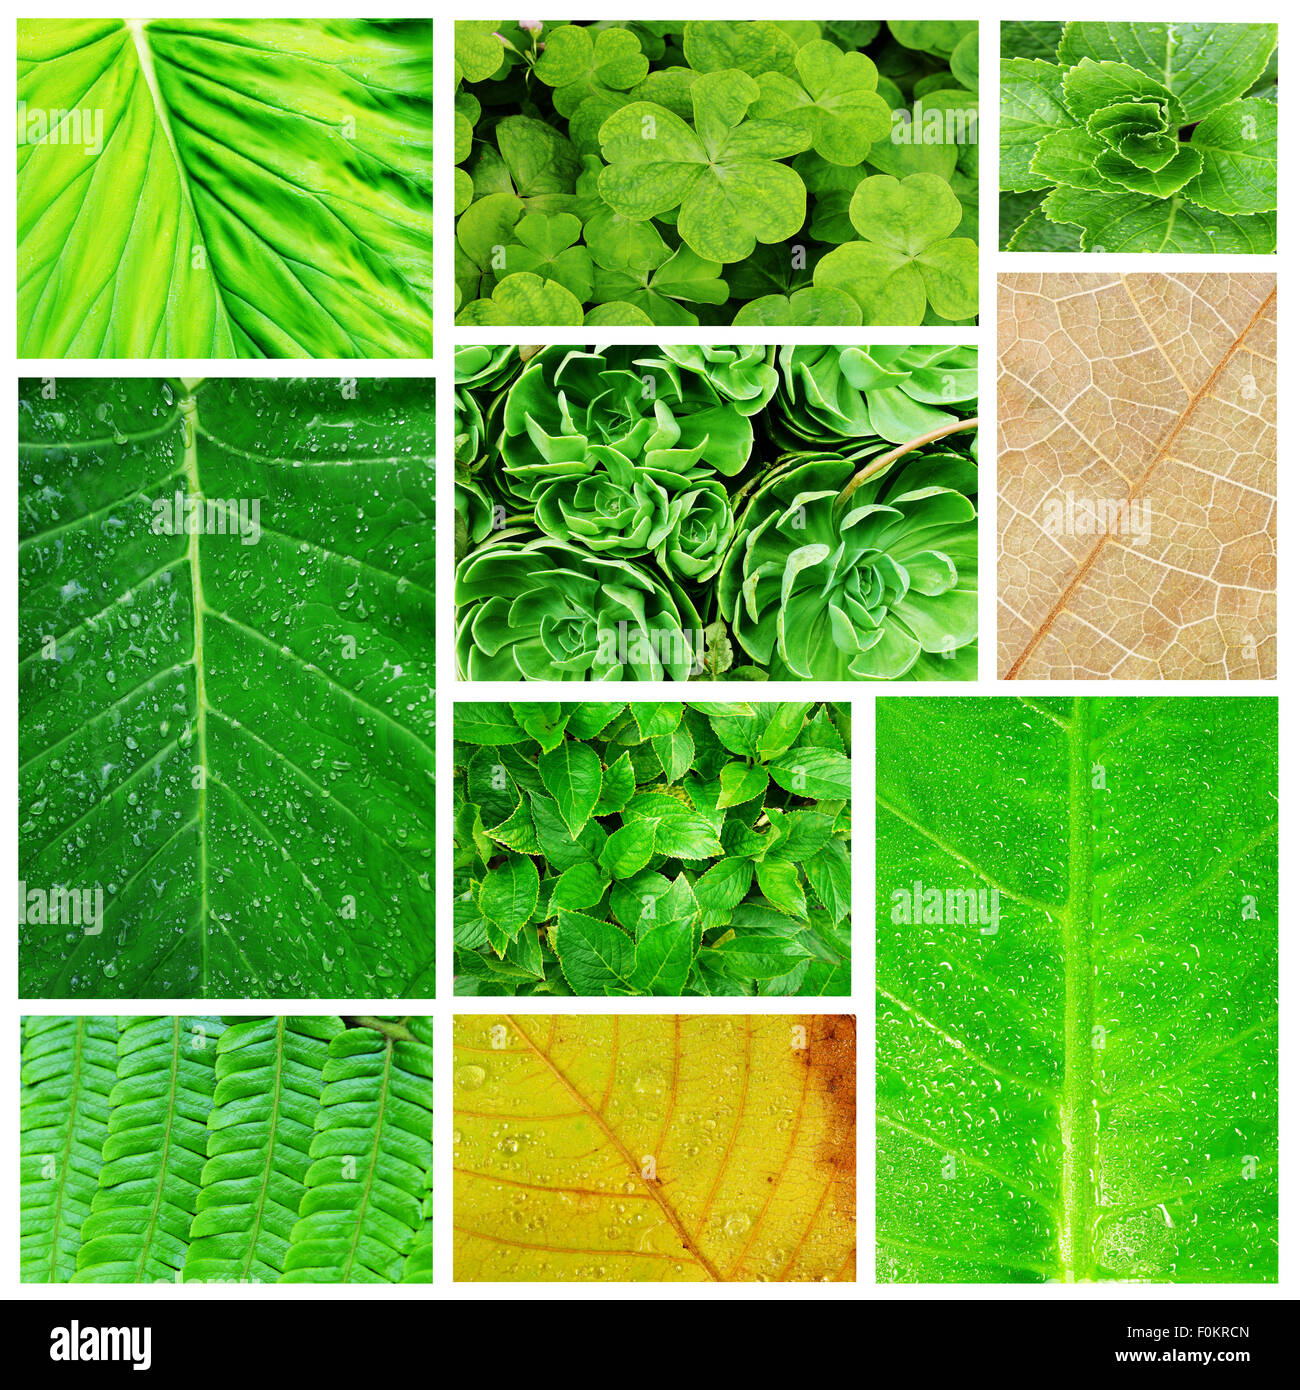 Collage of beautiful palnt leaves depicting nature Stock Photo